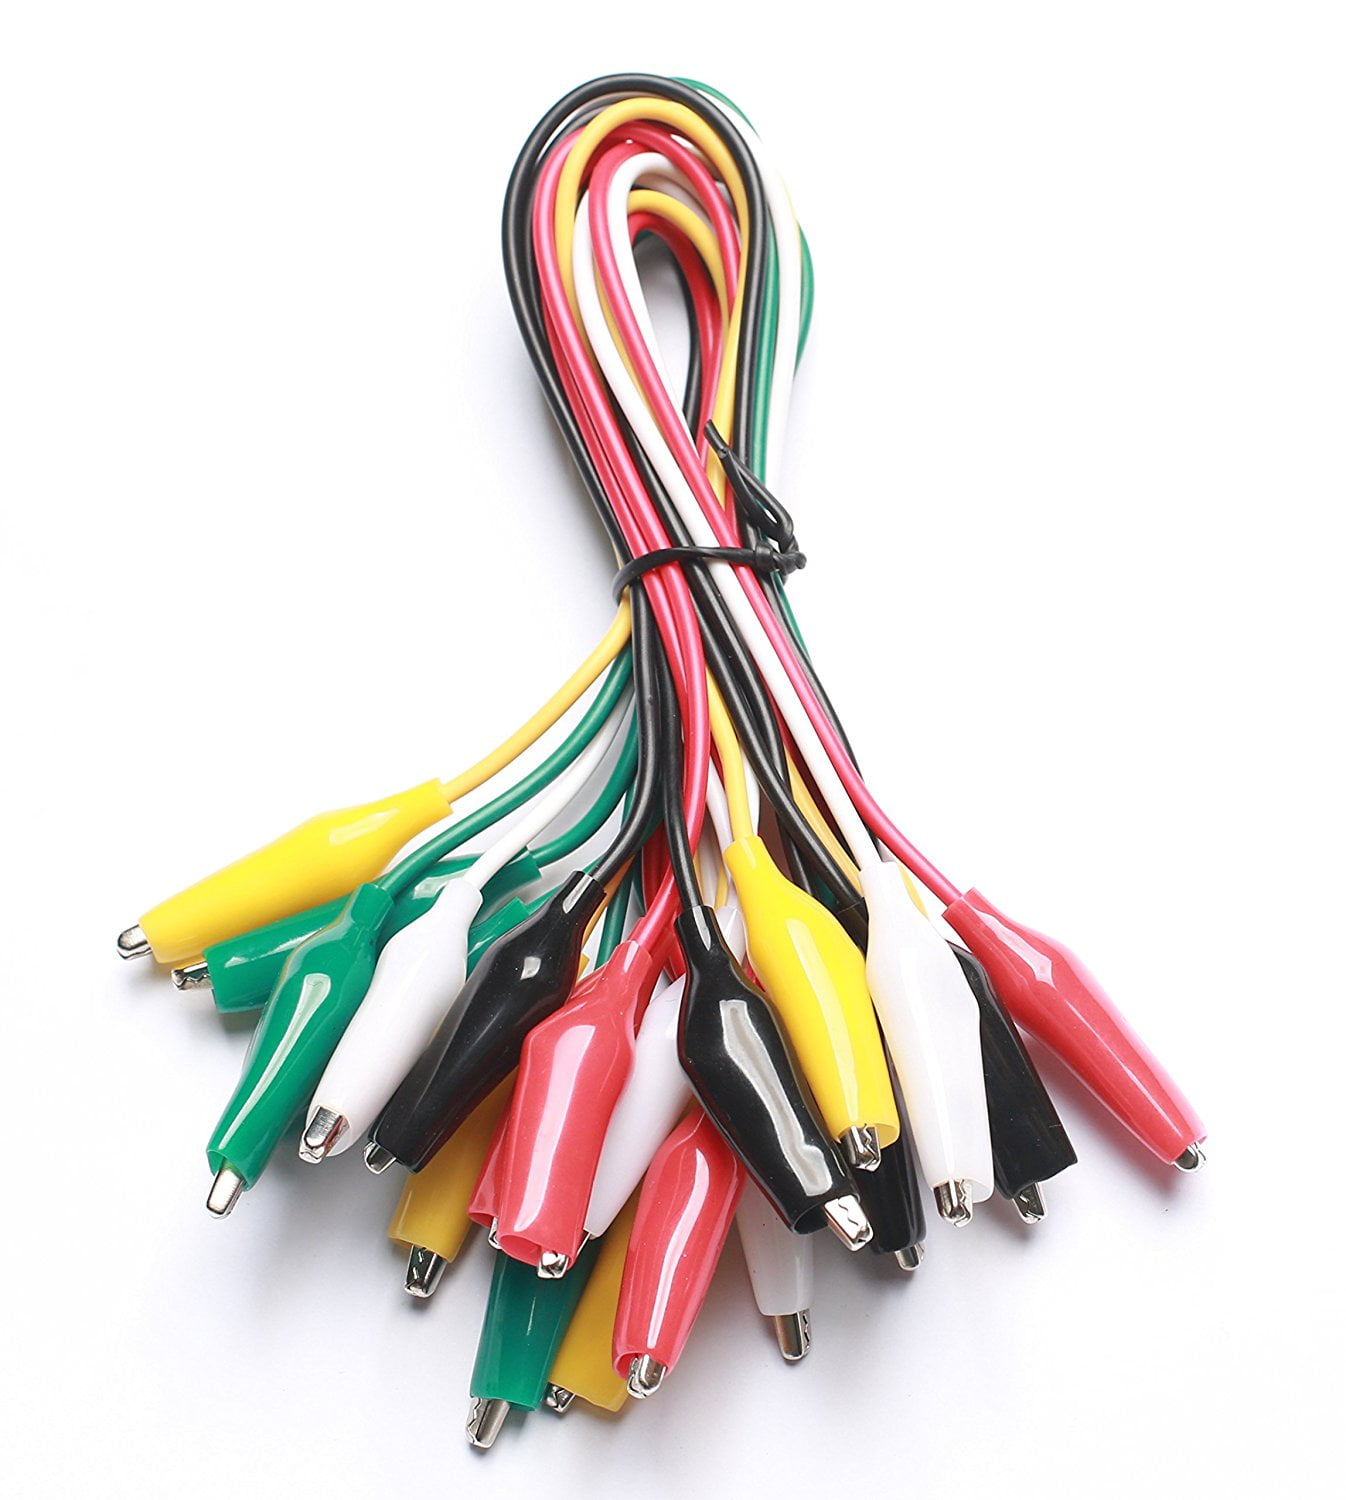 2 x 10pc Multi Color Insulating Test Lead Cable Set Double Ended Alligator Clips 